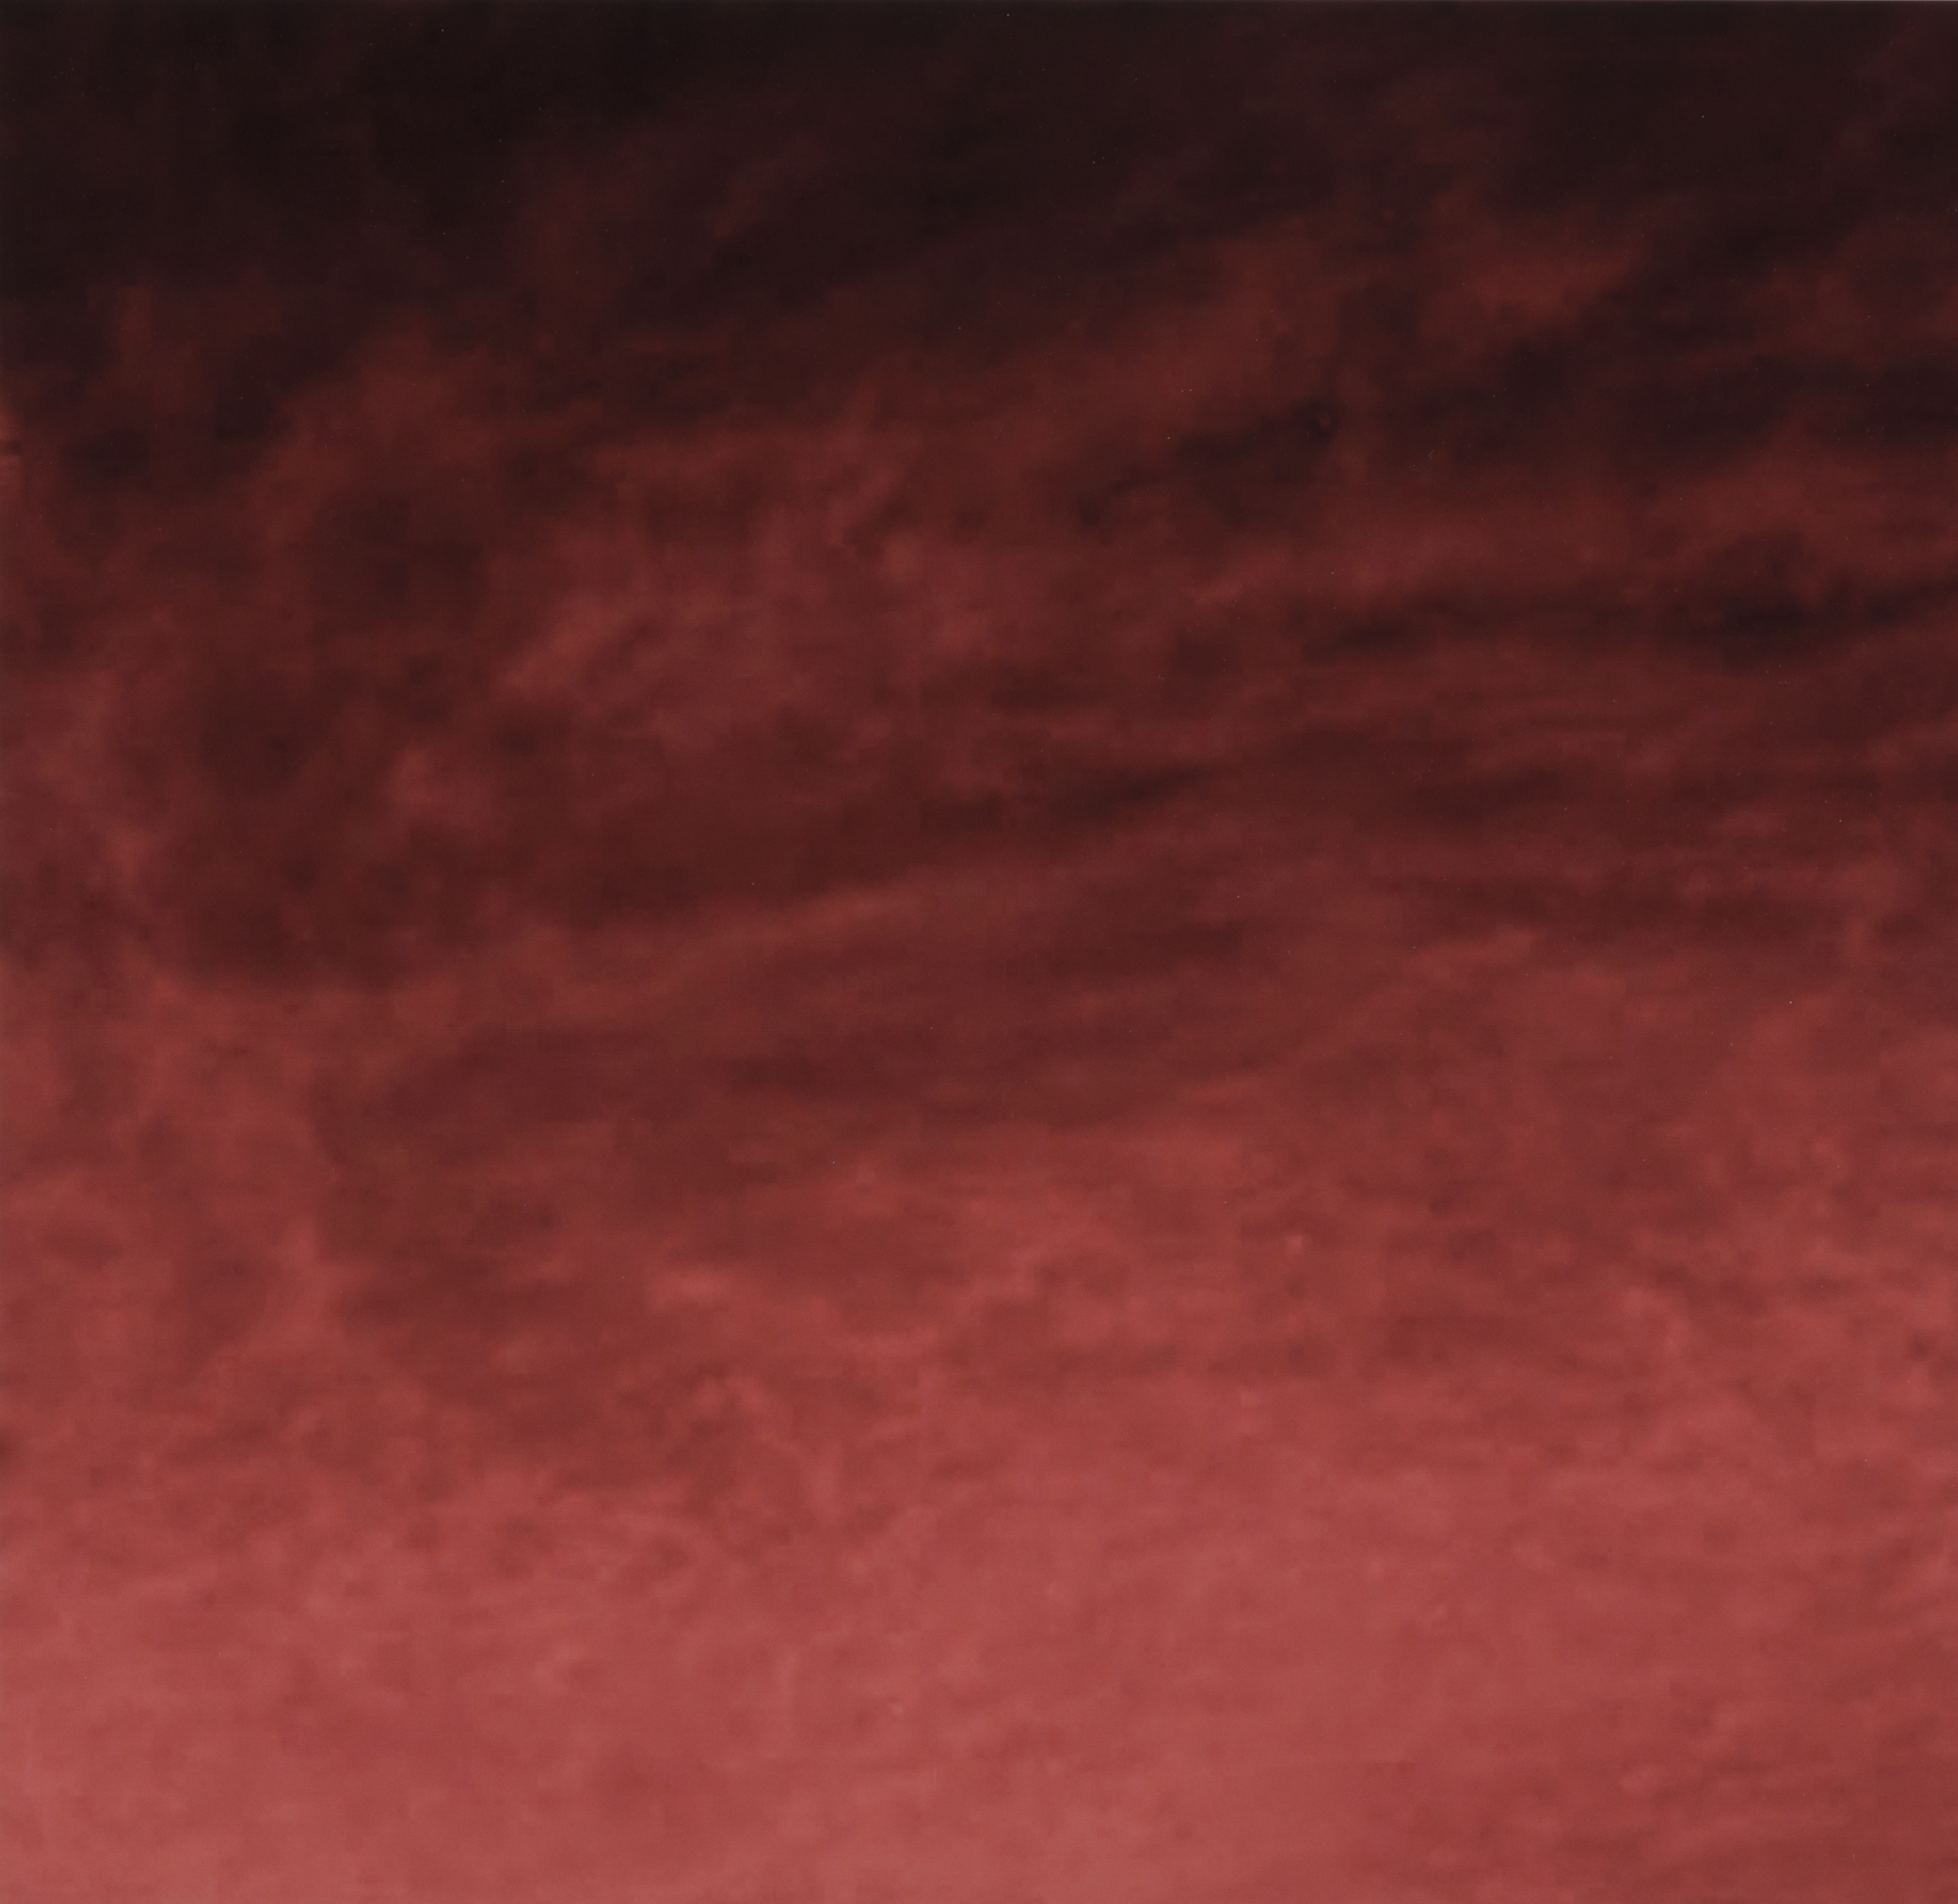 Clouds over Mars